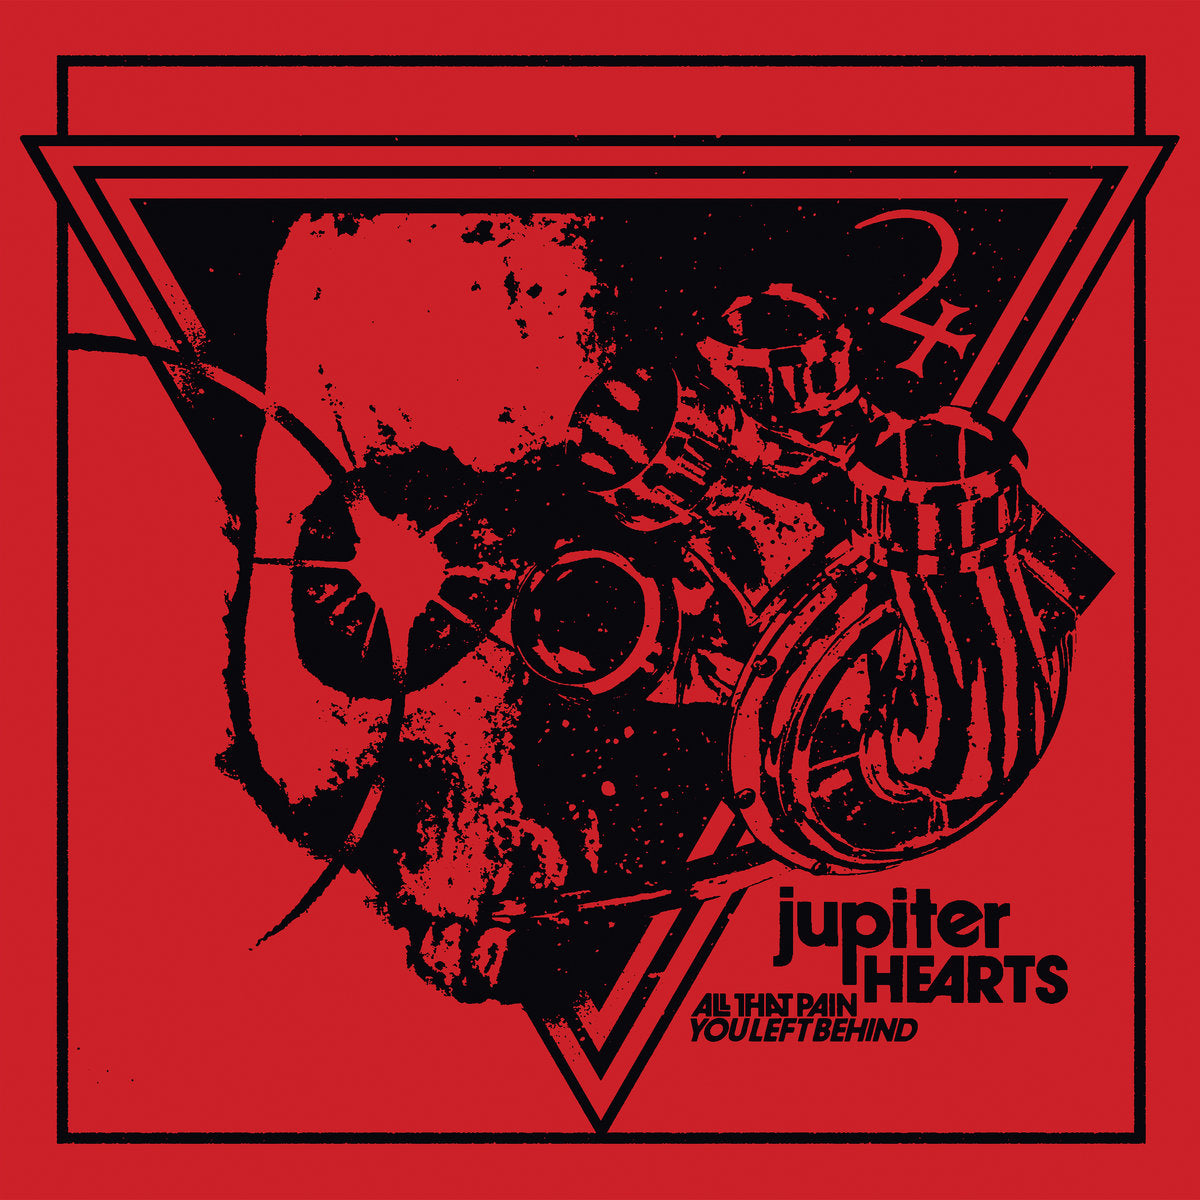 JUPITER HEARTS 'All That Pain You Left Behind' MINI LP / COLORED EDITION!